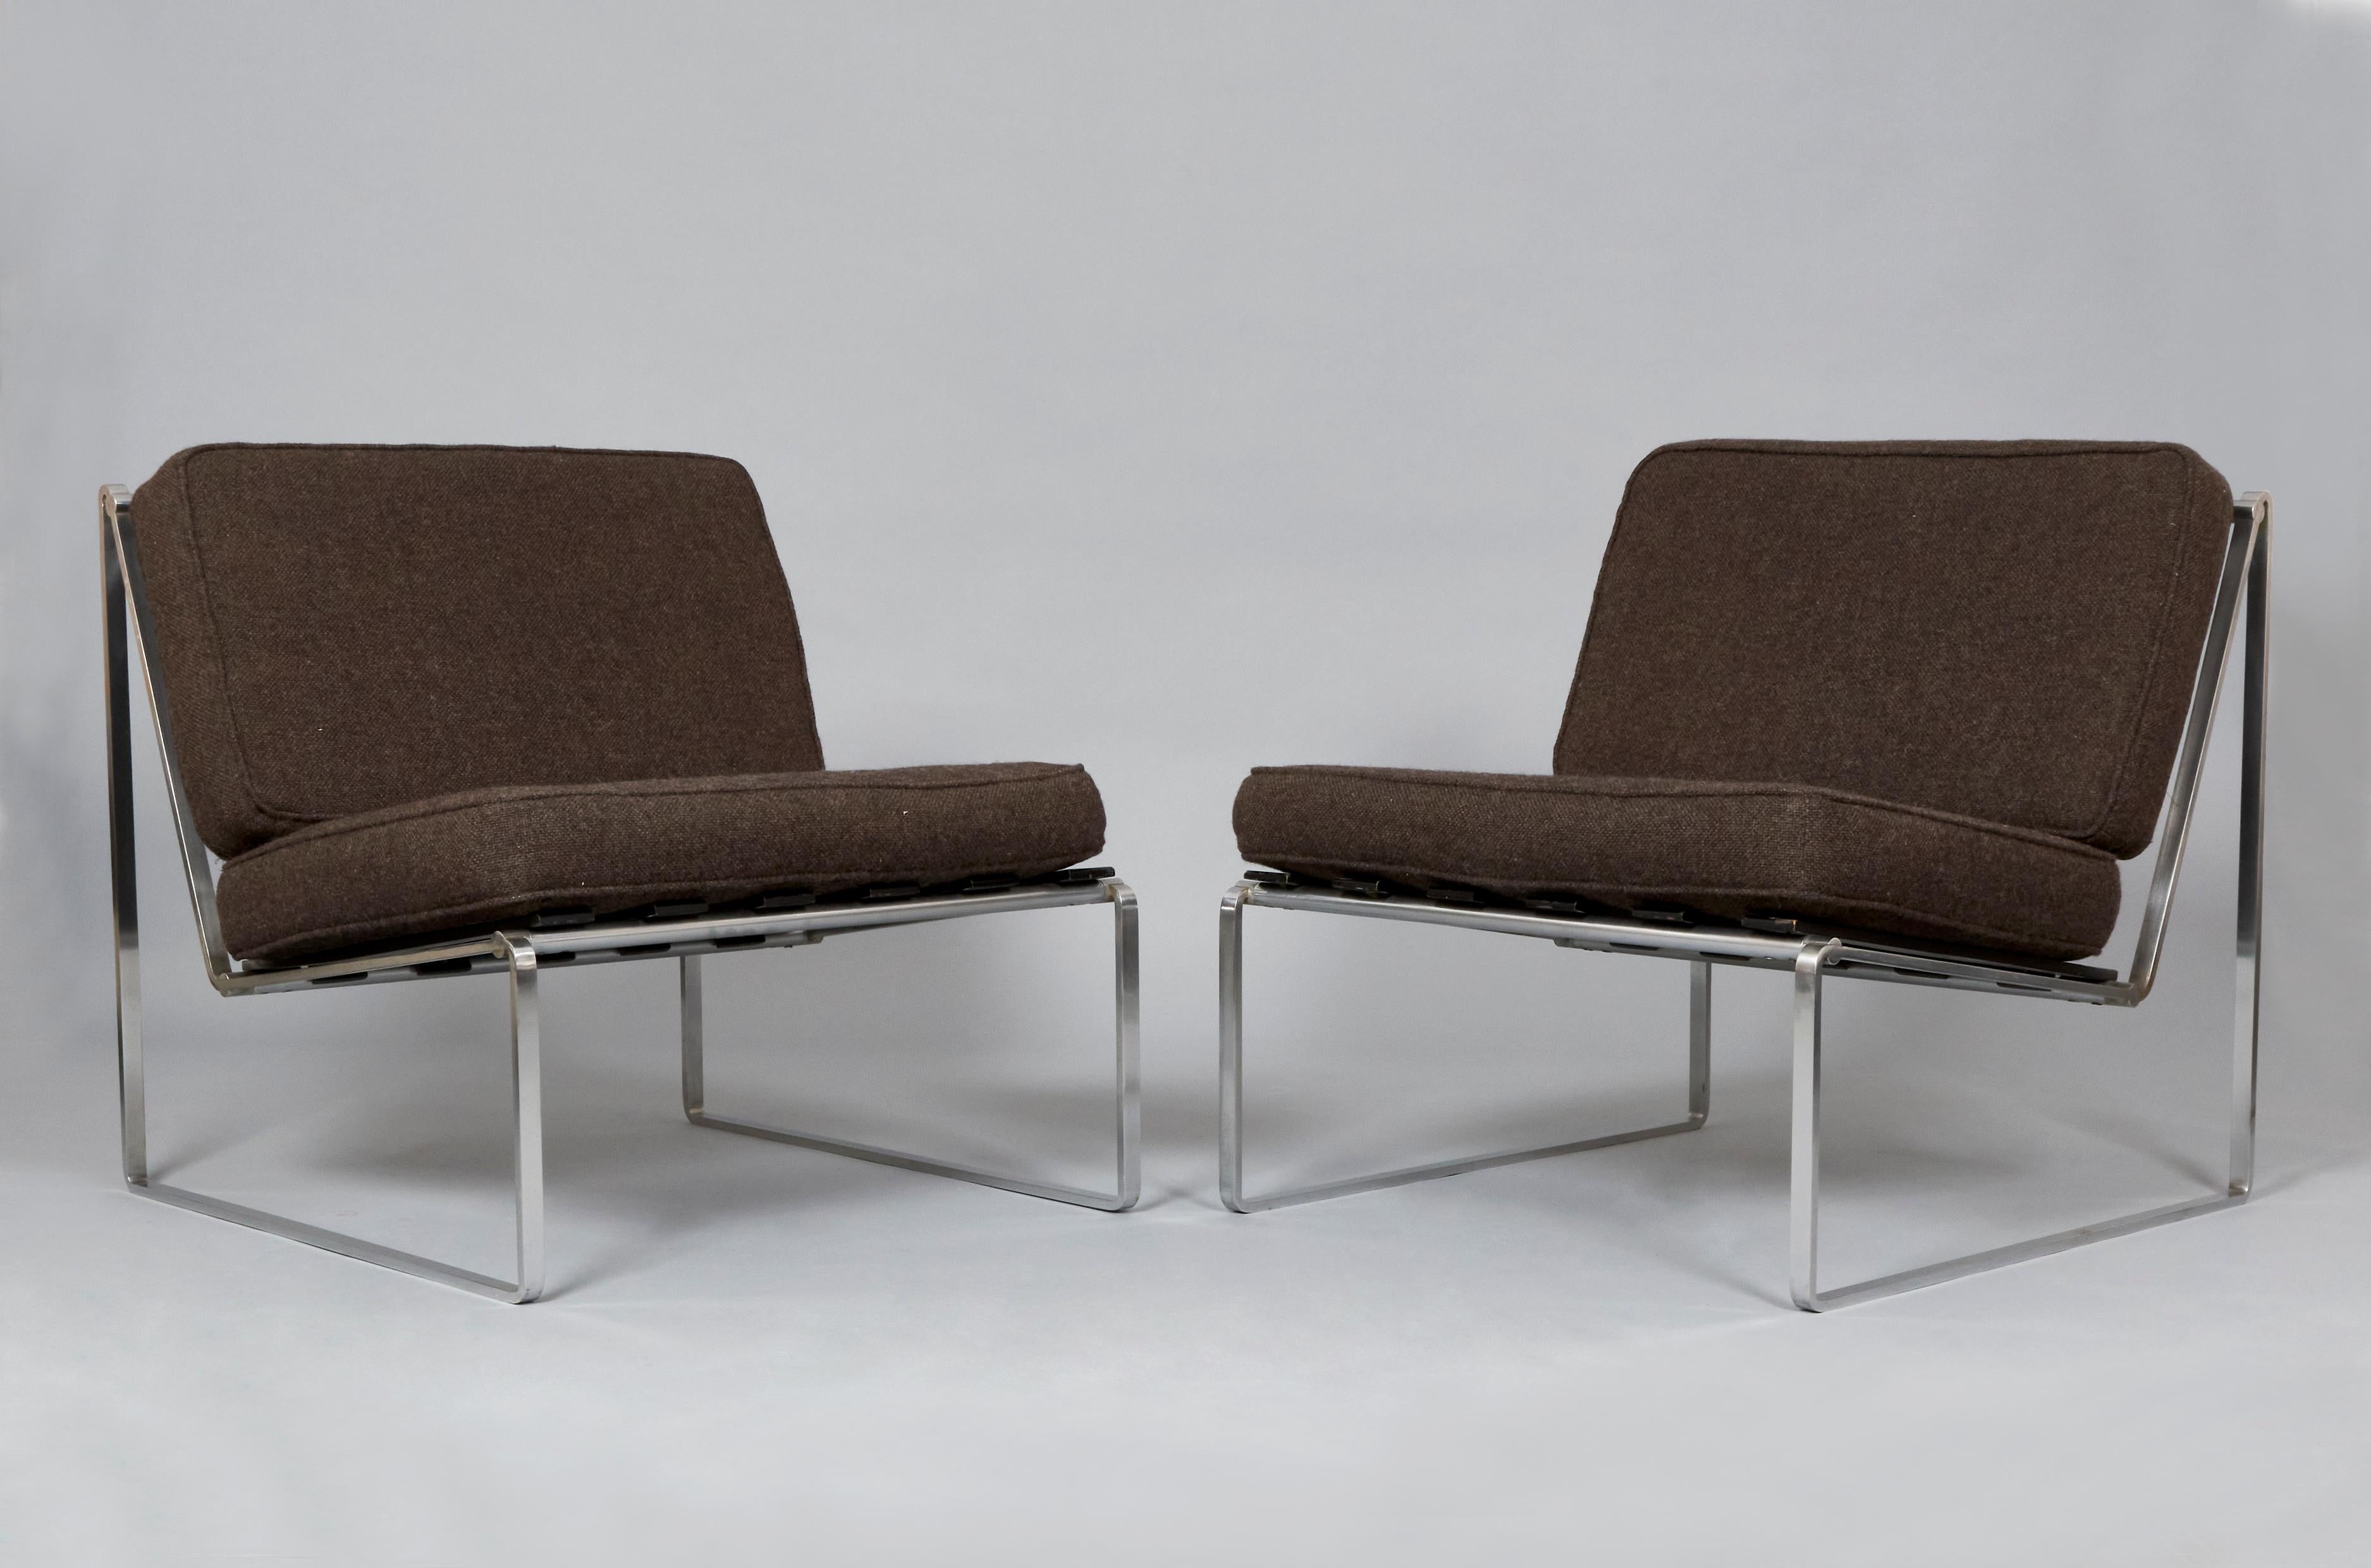 Pair of modernist easy chairs by the dutch designer Lhong Liang Ie in matt steel, black lacquered wood slats and deep gray upholstery produced by Artifort. Netherlads 1960s.

This seat represent one of the most renowned designs by Khong Liang Ie.